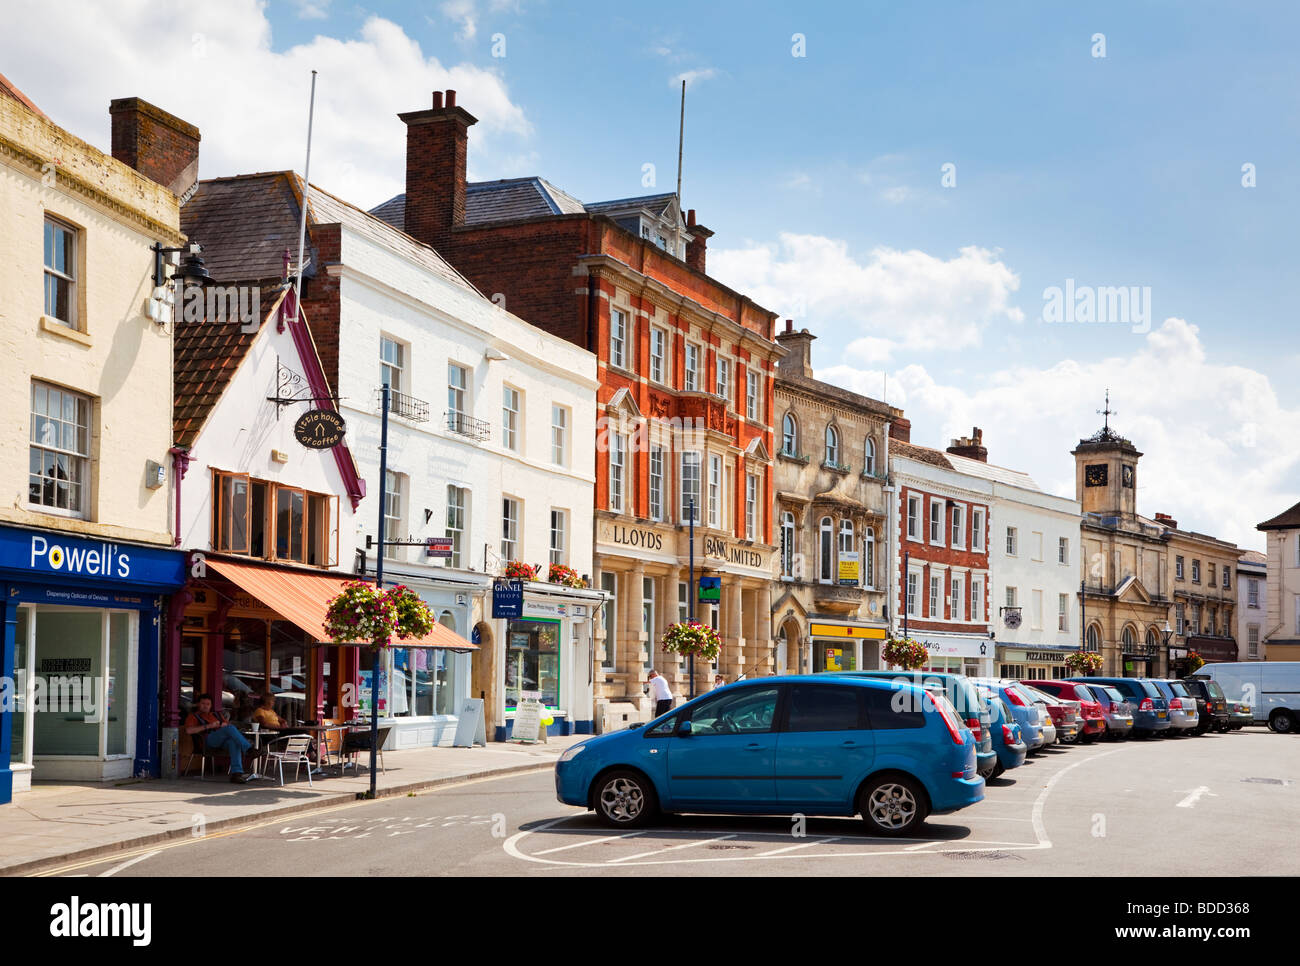 Devizes, Wiltshire, UK - Historic buildings and shops in the Market Place high street at Devizes, Wiltshire, England, UK Stock Photo